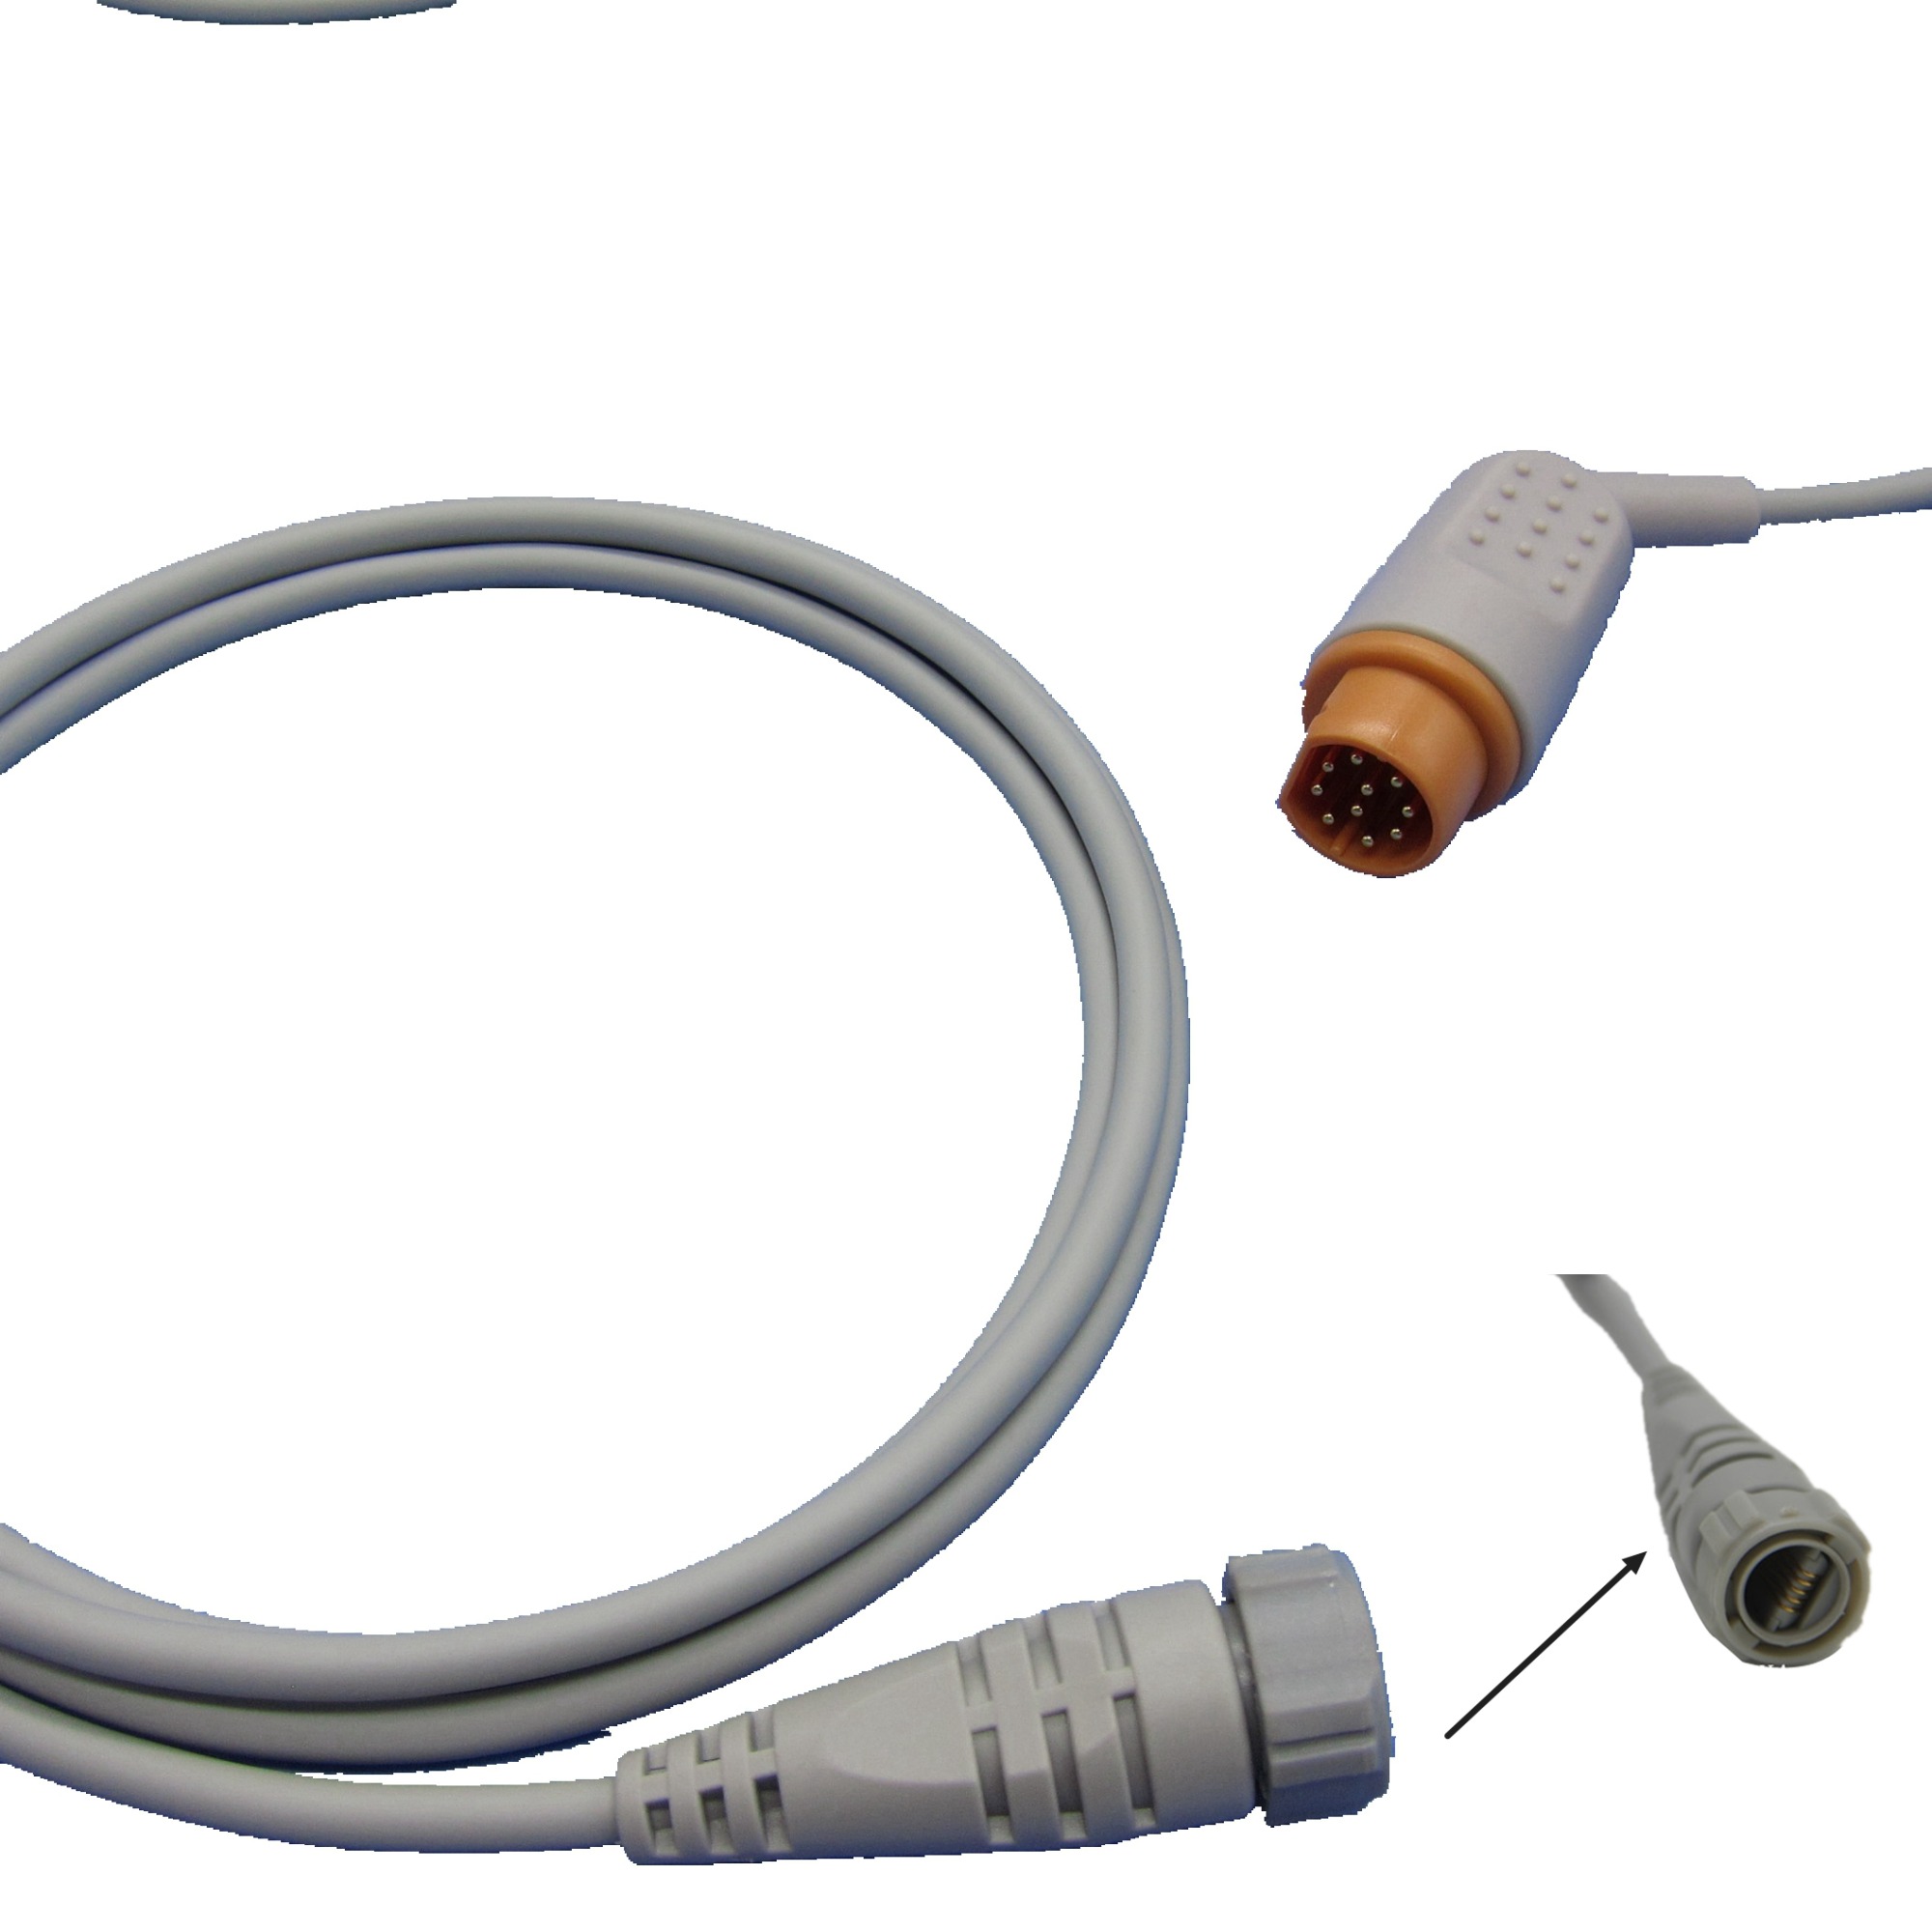 IBP Cable With Utah BD ABBOTT Edward Medex Connector For Siemens Pressure Transducer IBP Adapter